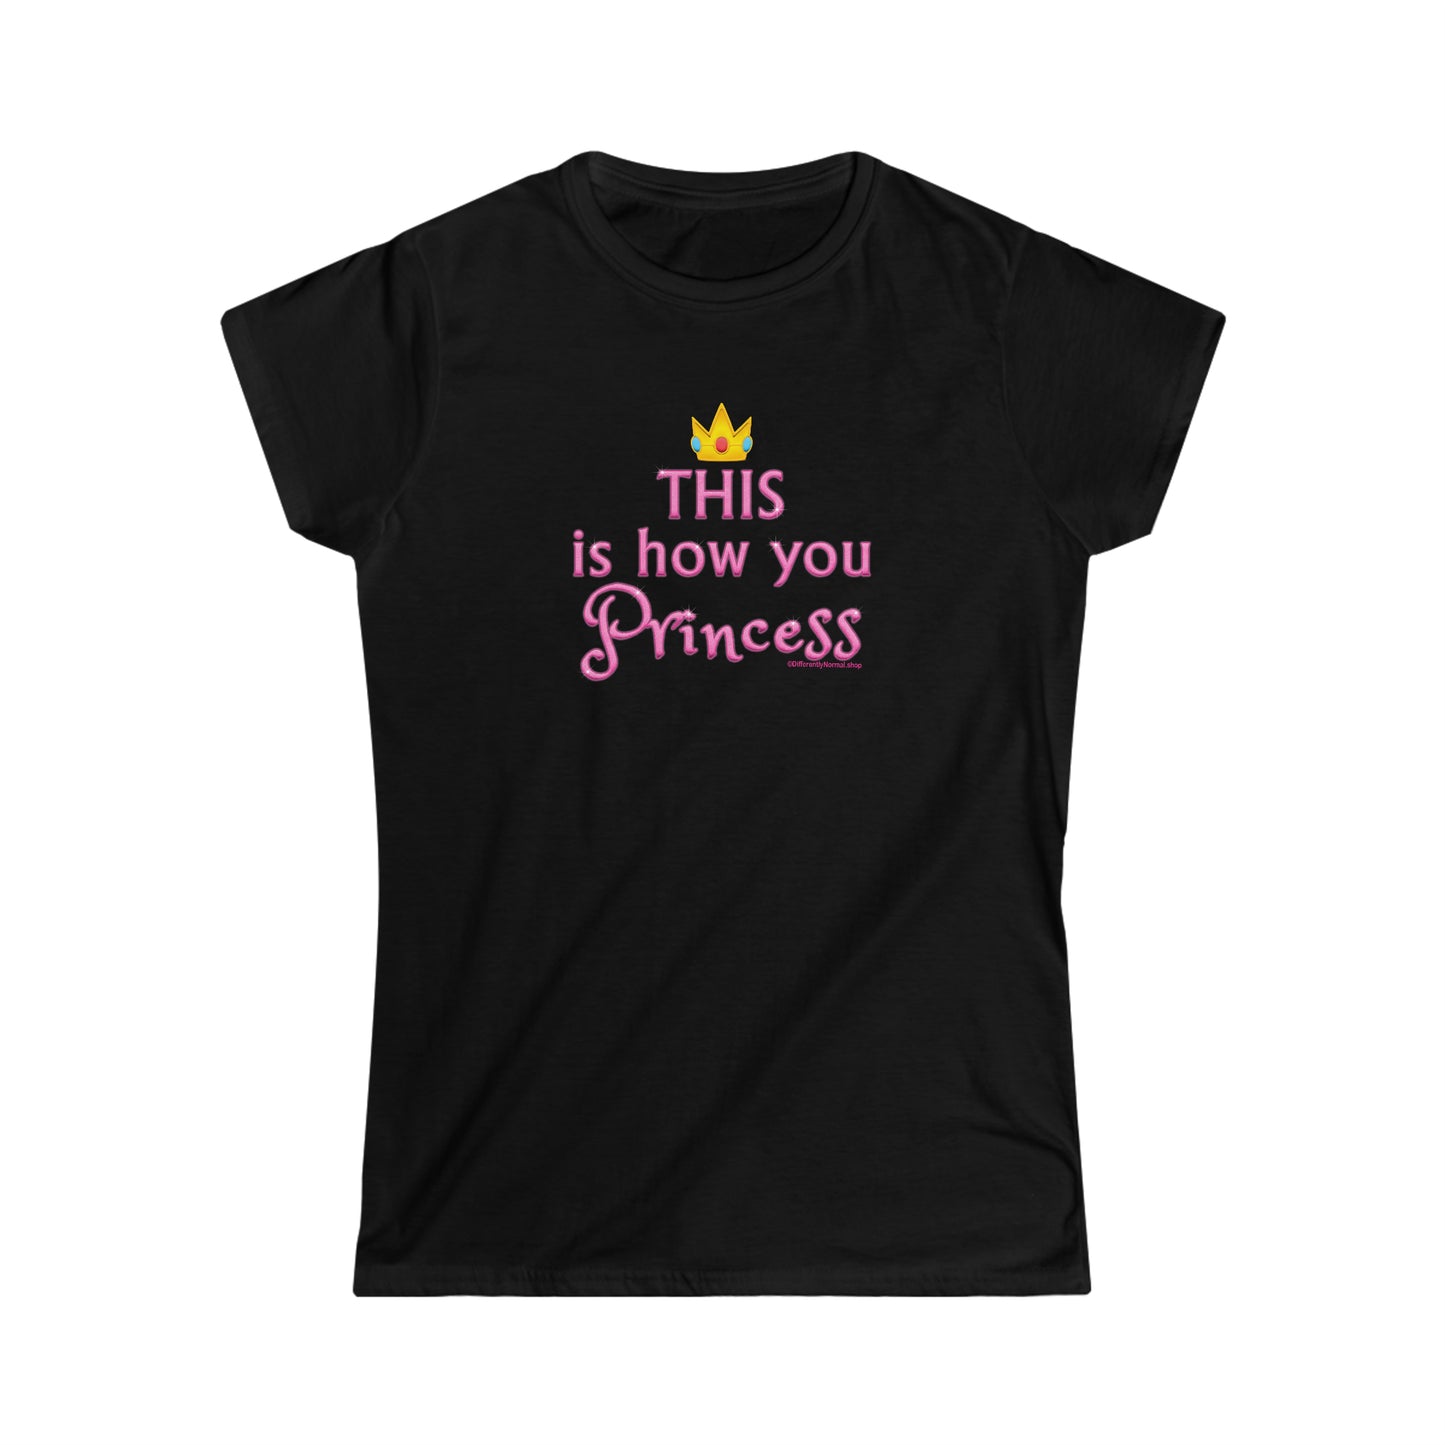 This is How You Princess - Fitted T-Shirt